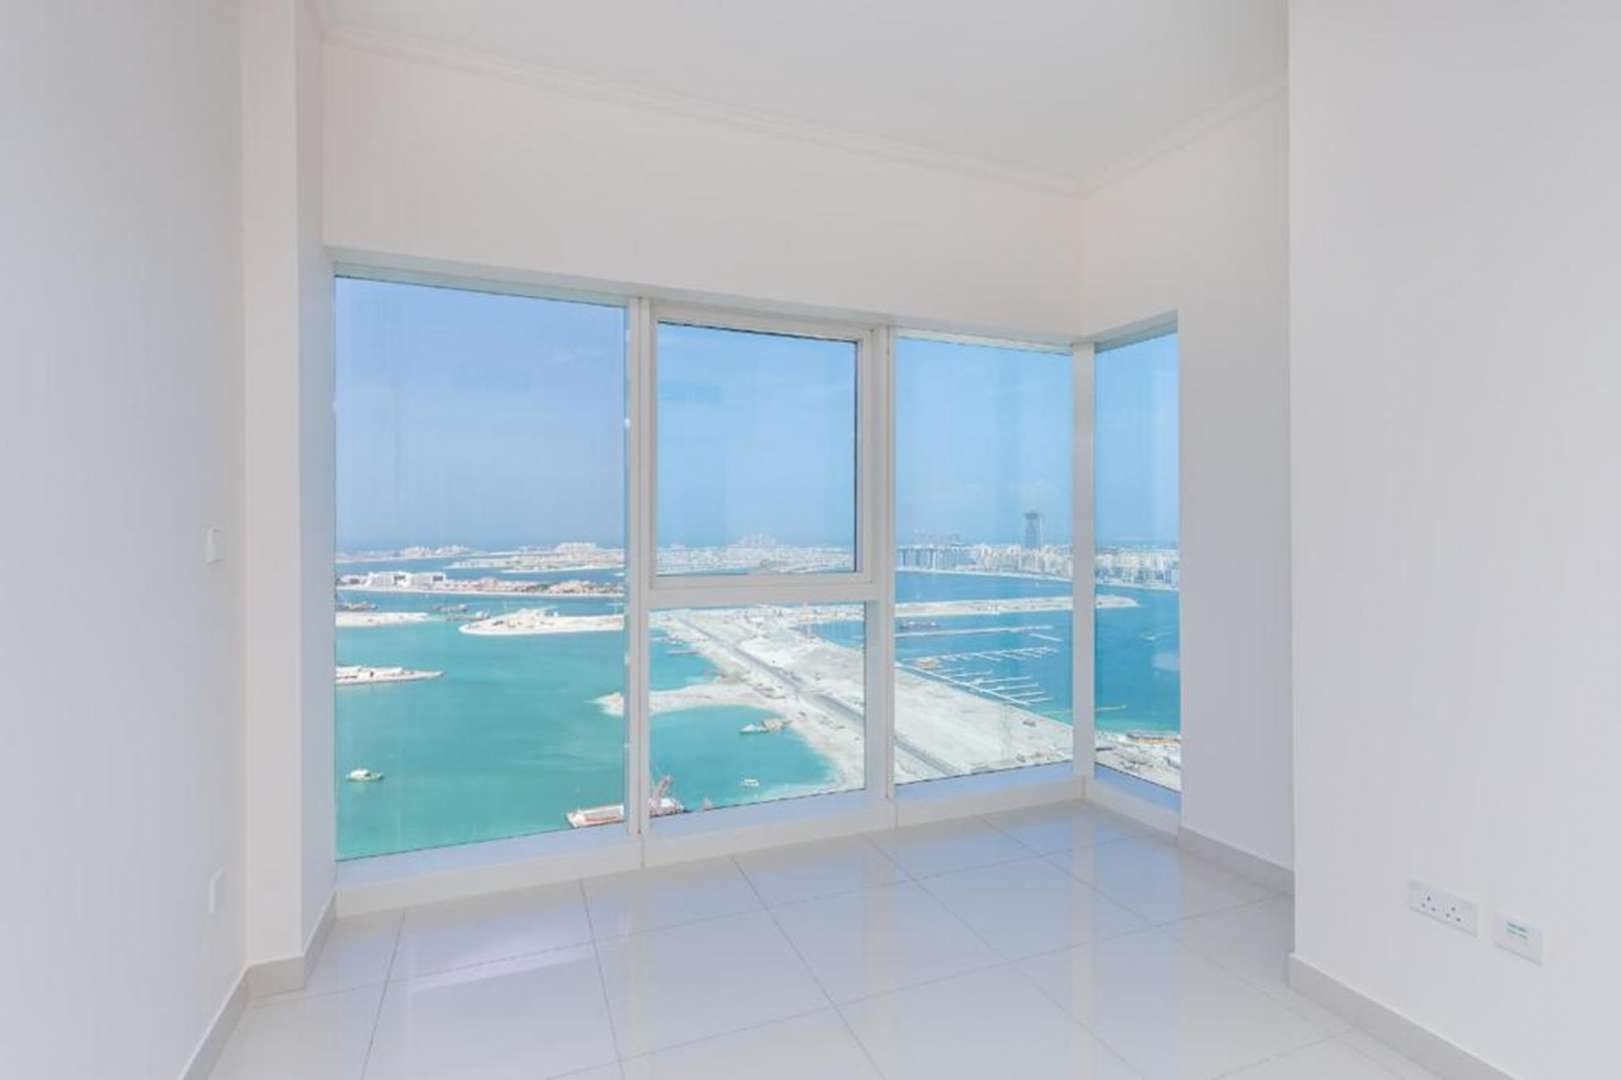 3 Bedroom Apartment For Rent Damac Heights Lp06044 222f4bf2f152d600.jpg